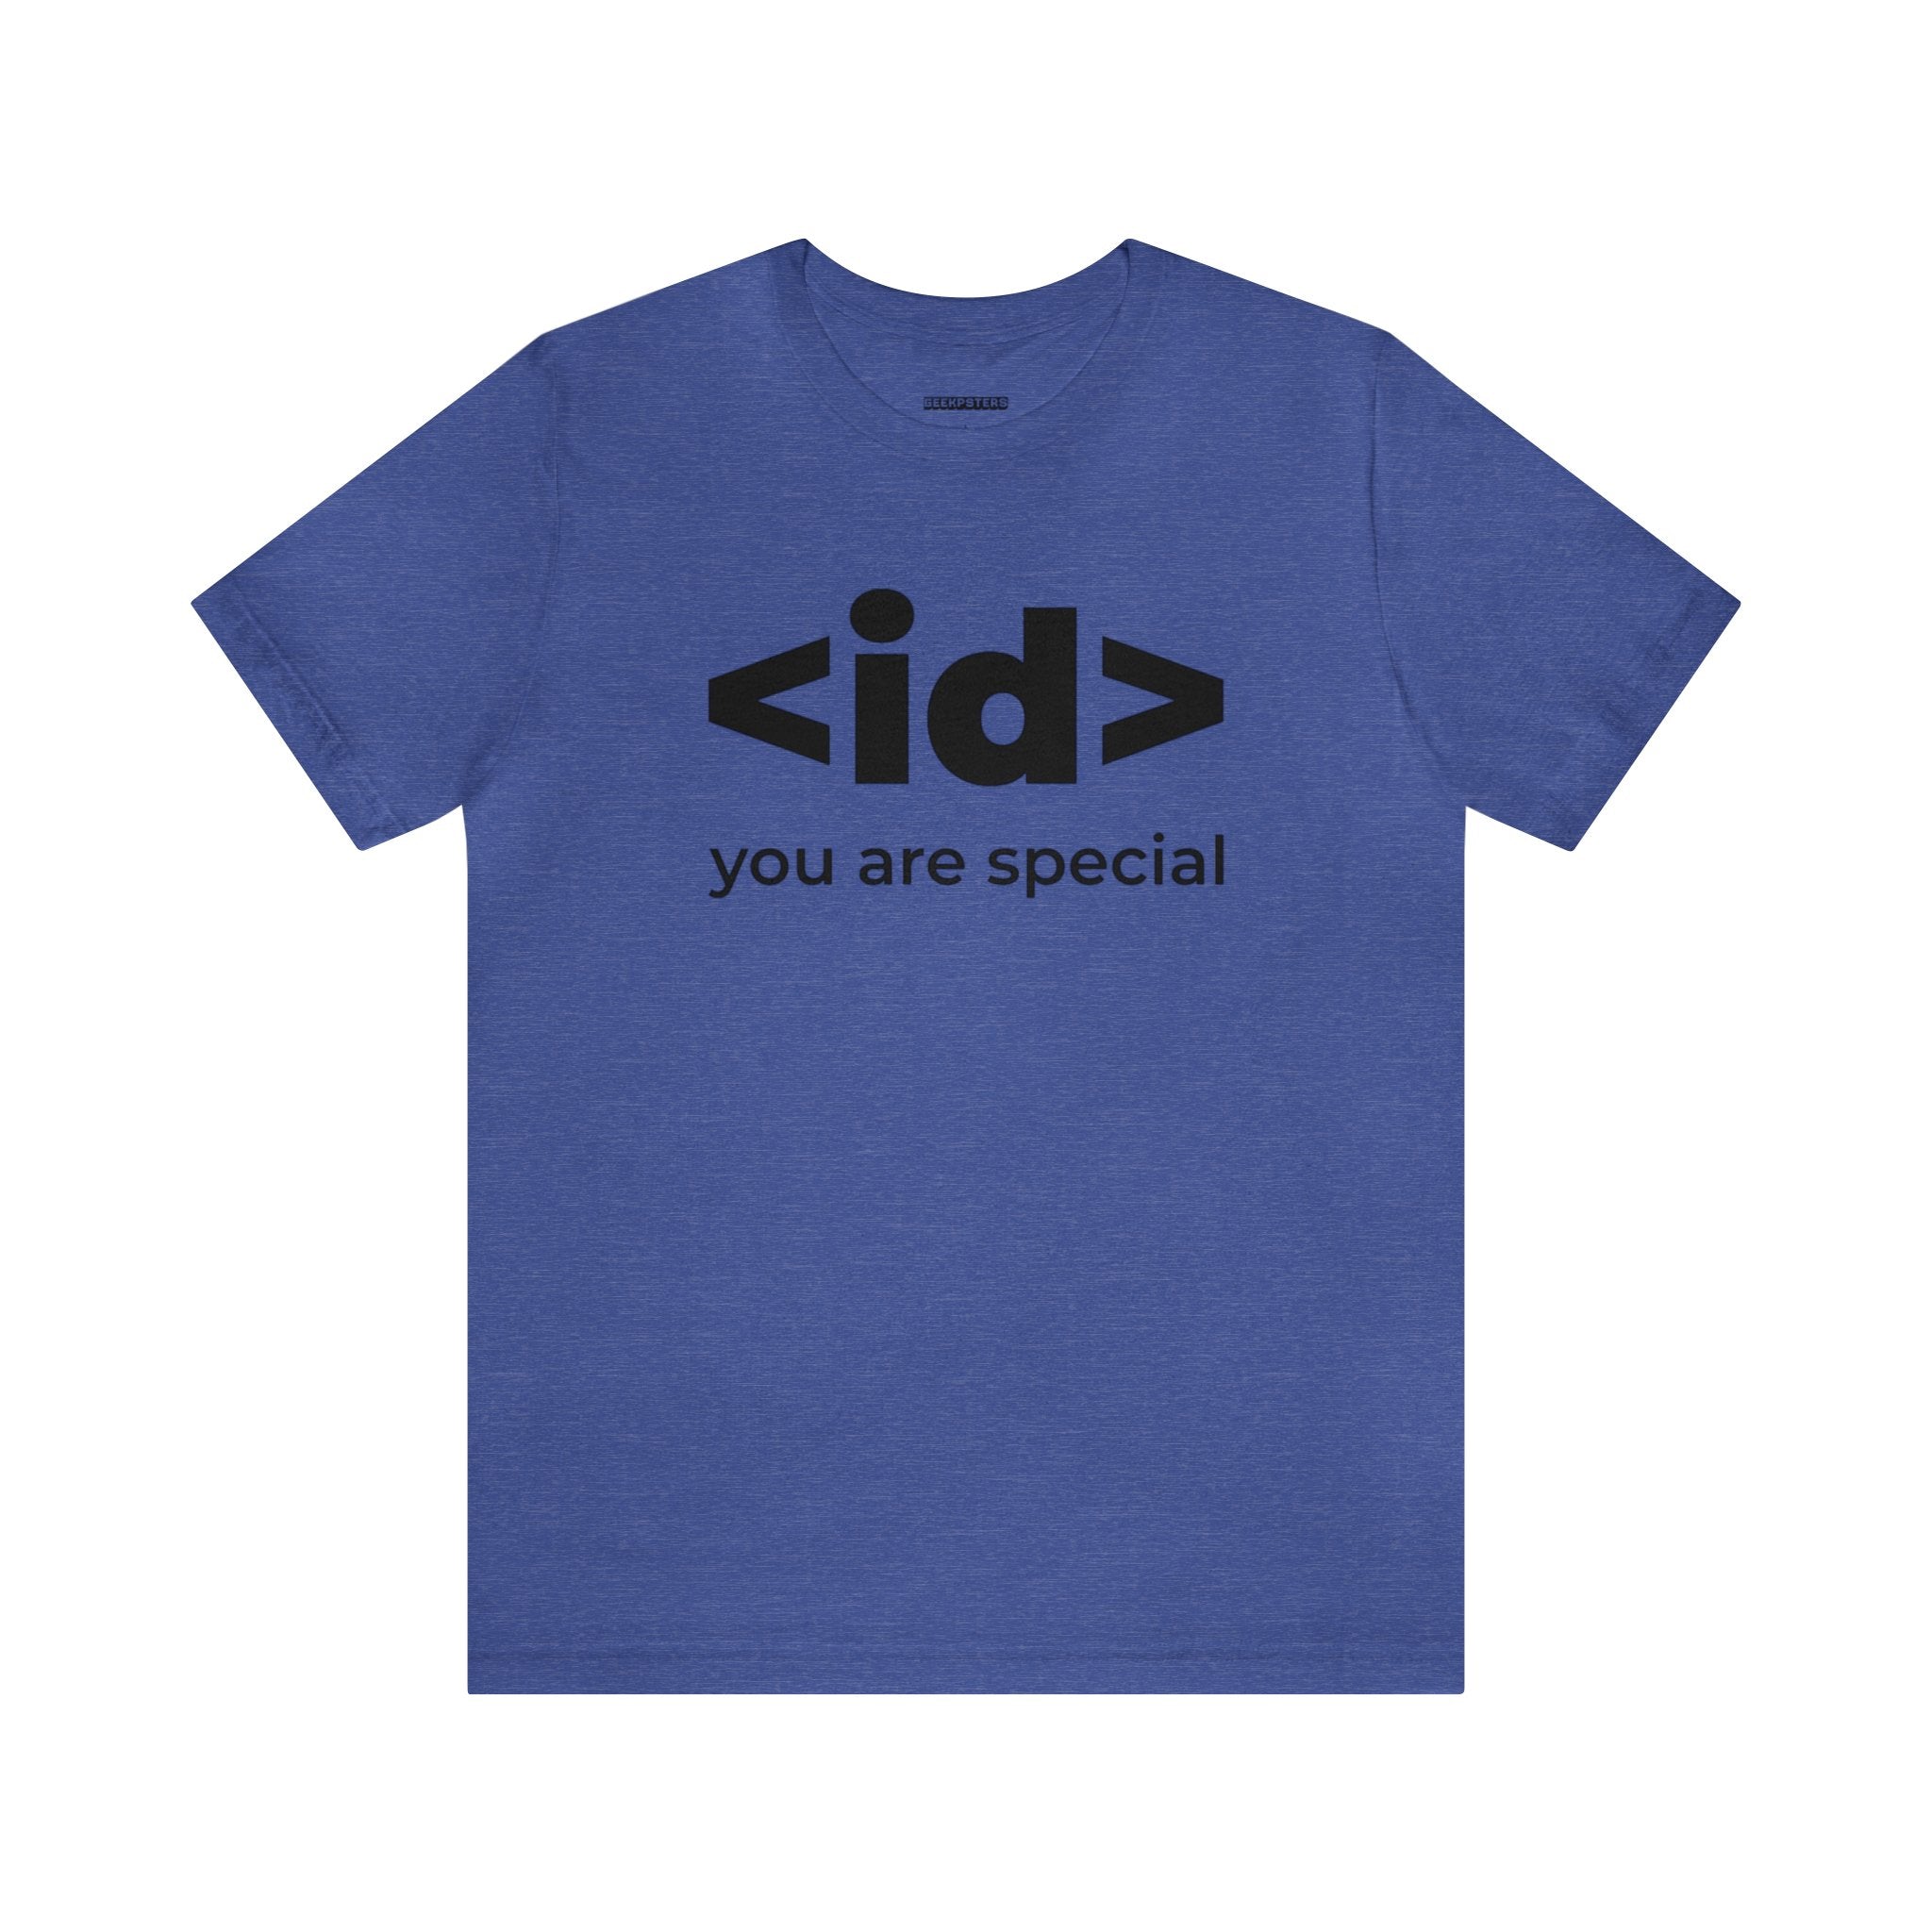 A brilliant blue <id> You Are Special T-Shirt to show off your specialness.